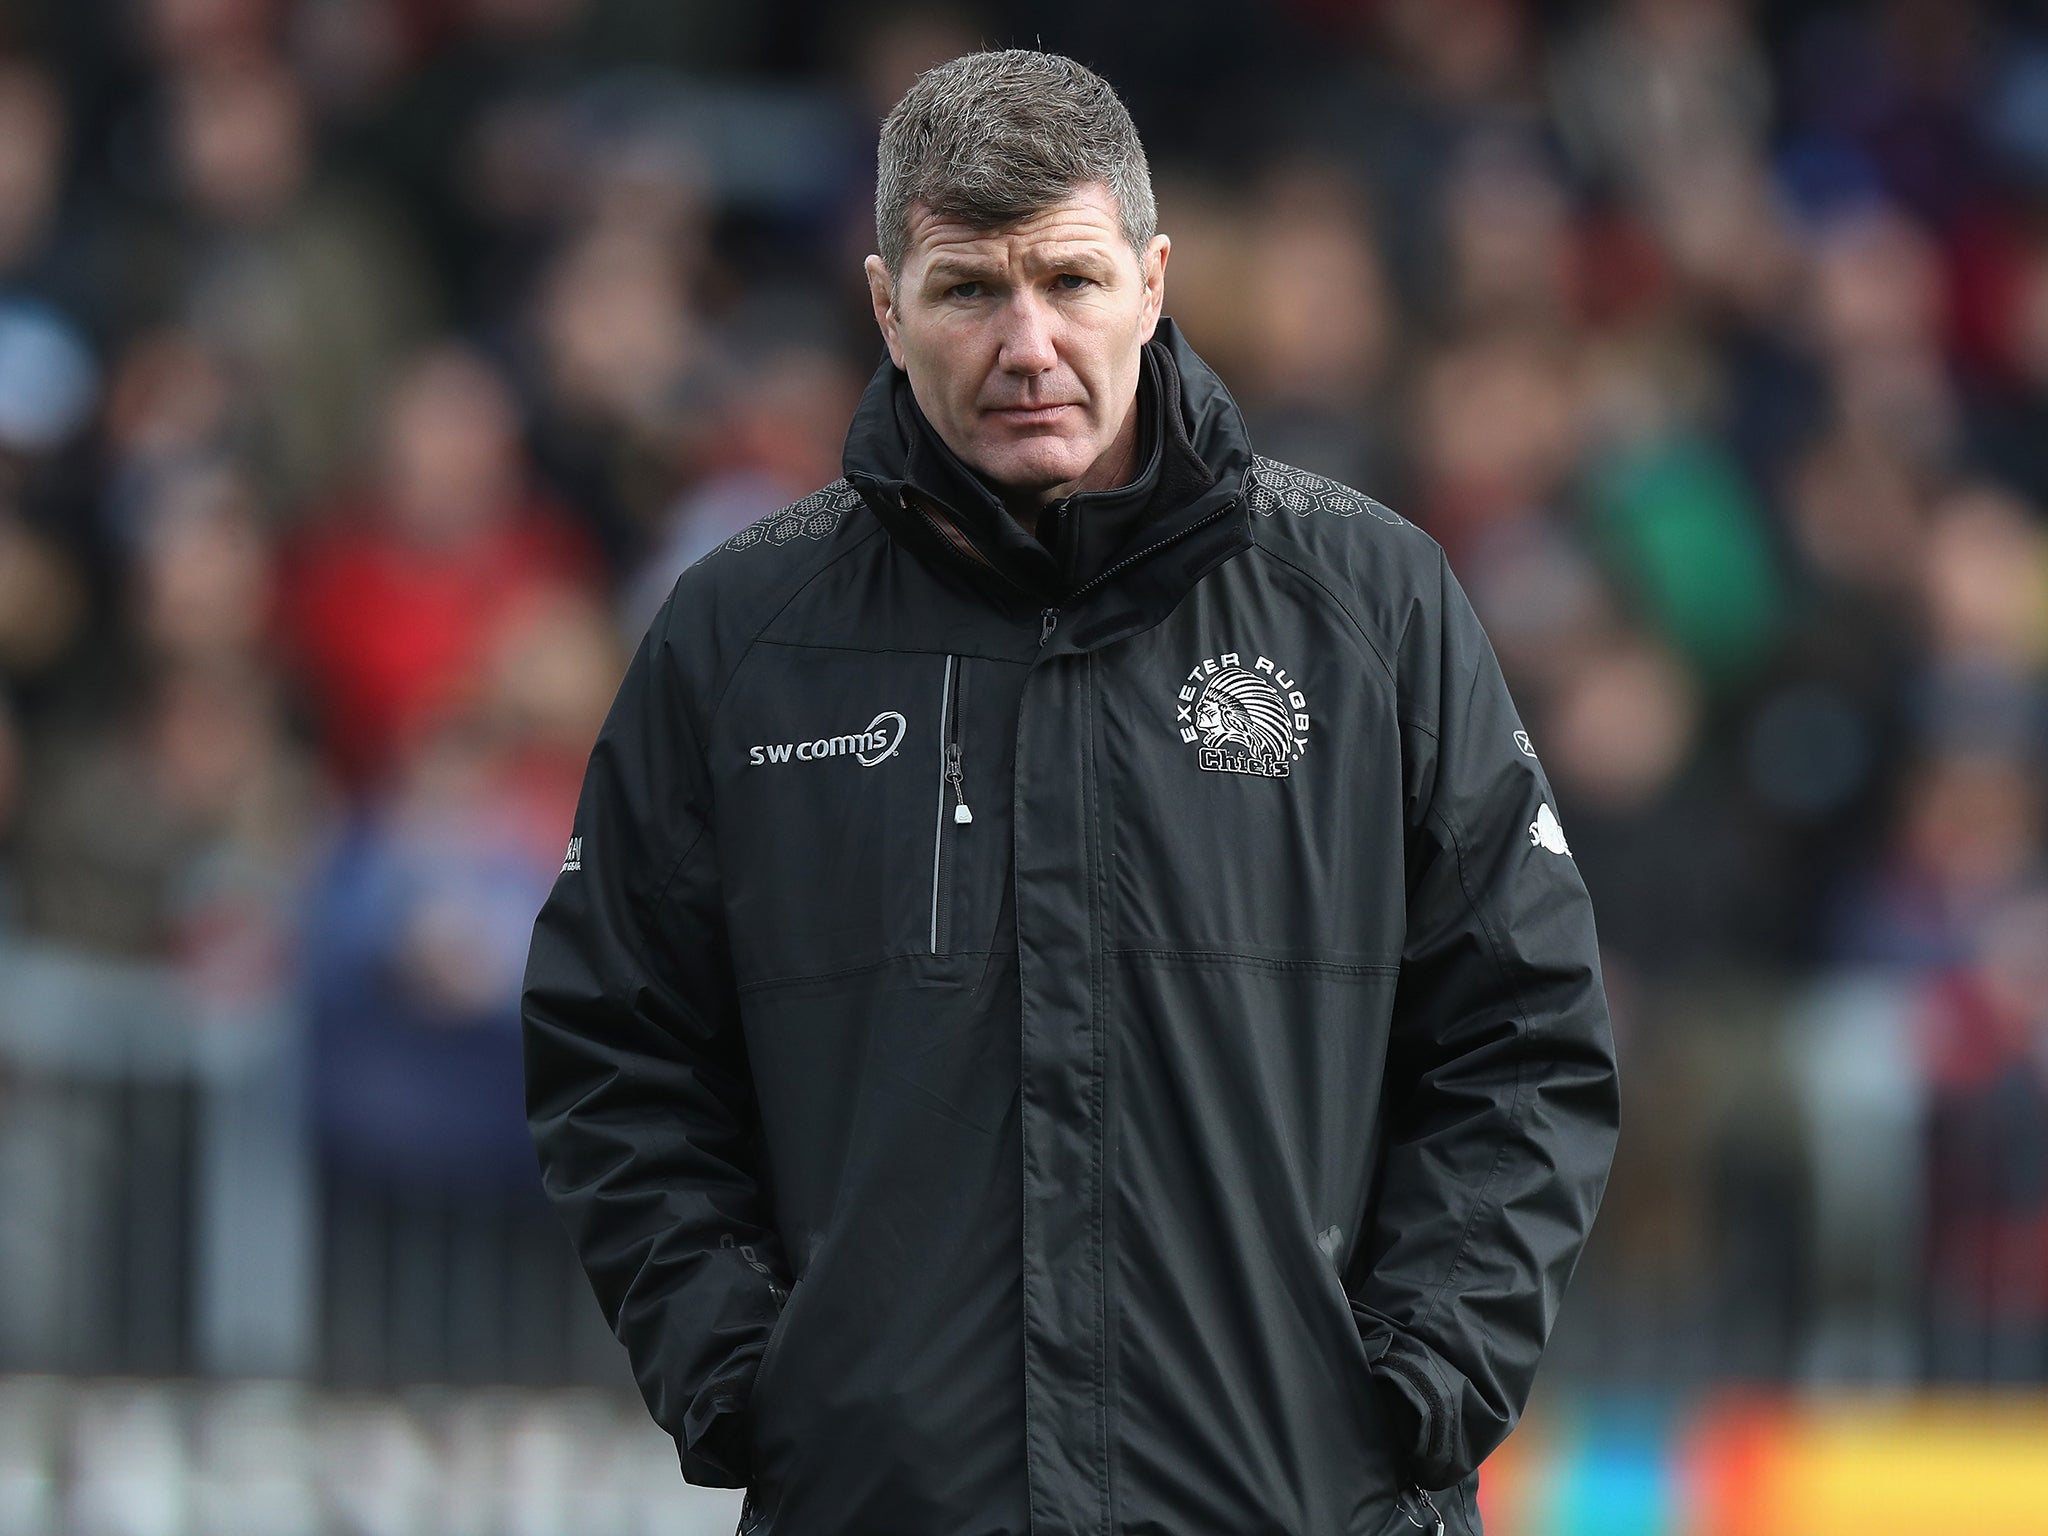 Rob Baxter believes Cuthbert's attributes will suit Exeter's style